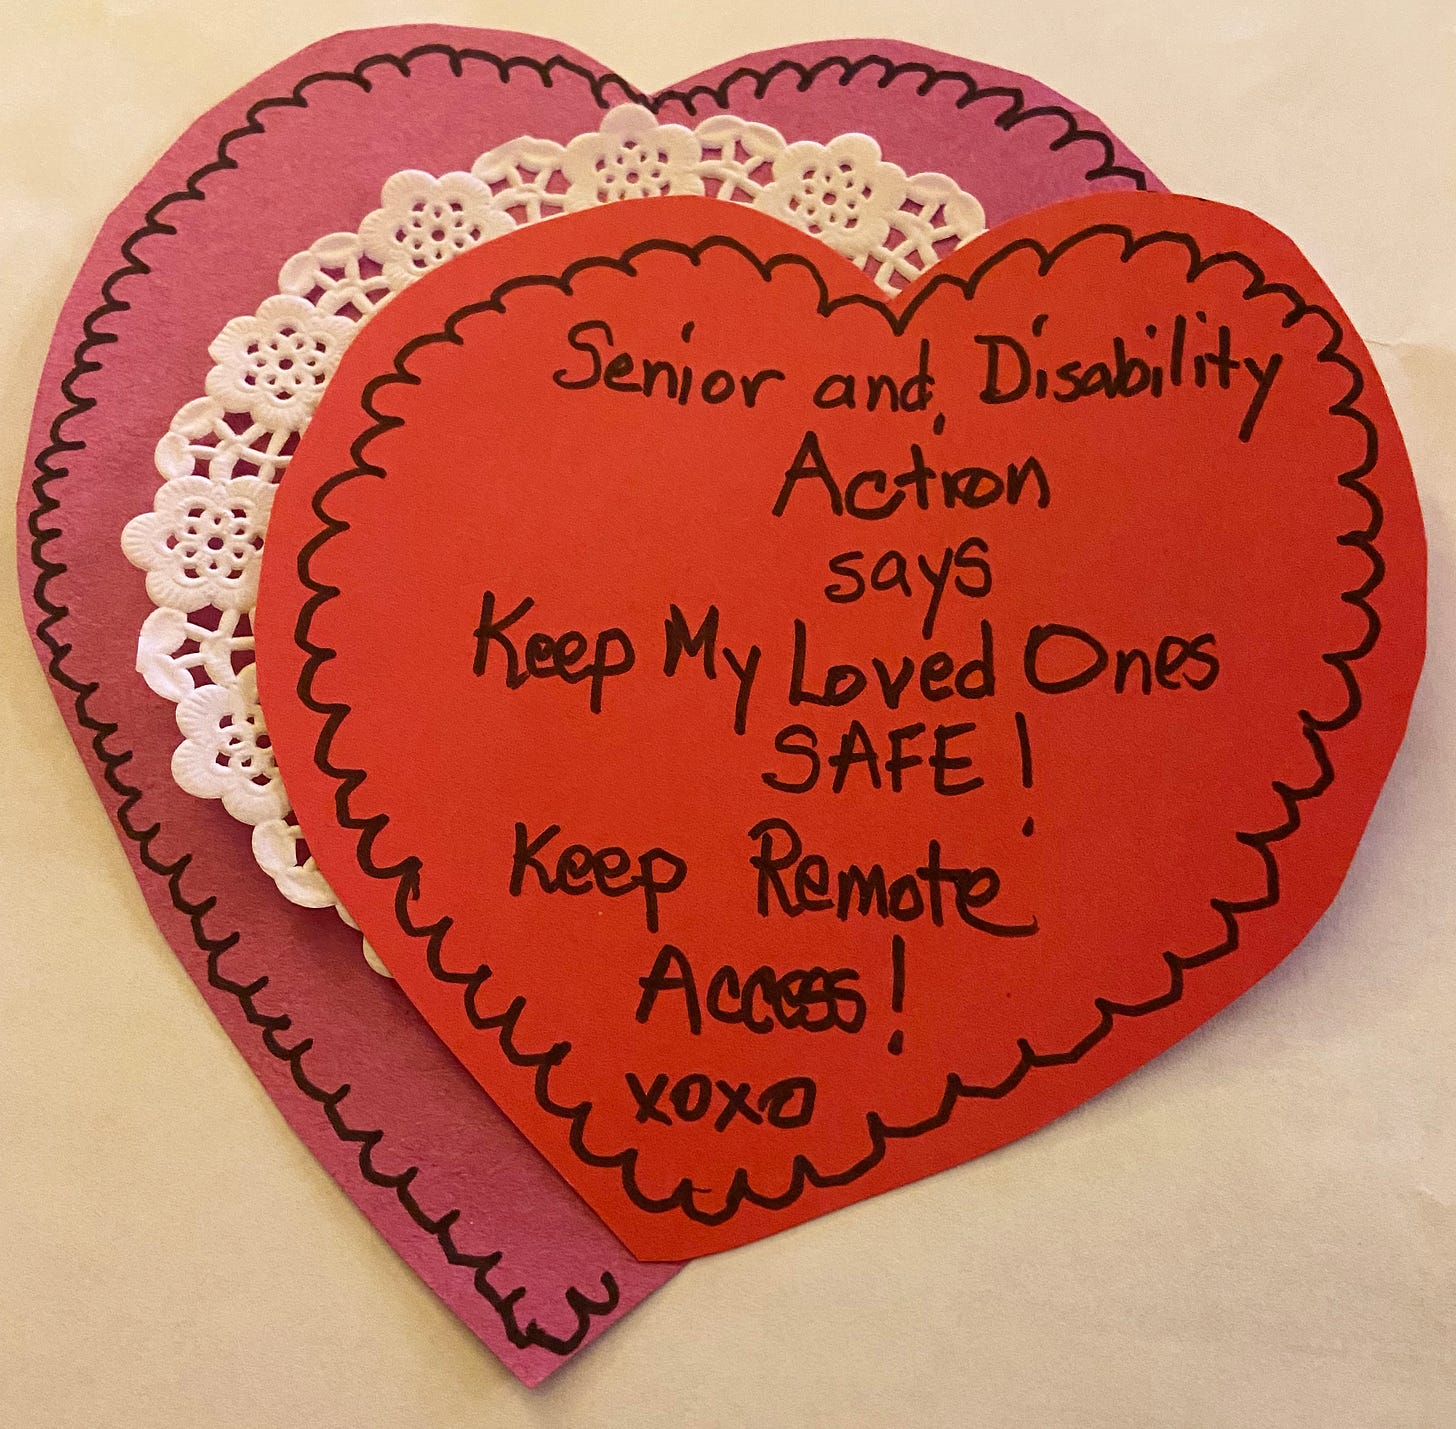 The photo is of a homemade Valentine card, a double construction paper heart sandwiching a doily, decorated with black marker and the words Senior and Disability Action says Keep my loved ones safe! Keep Remote Access! xoxo